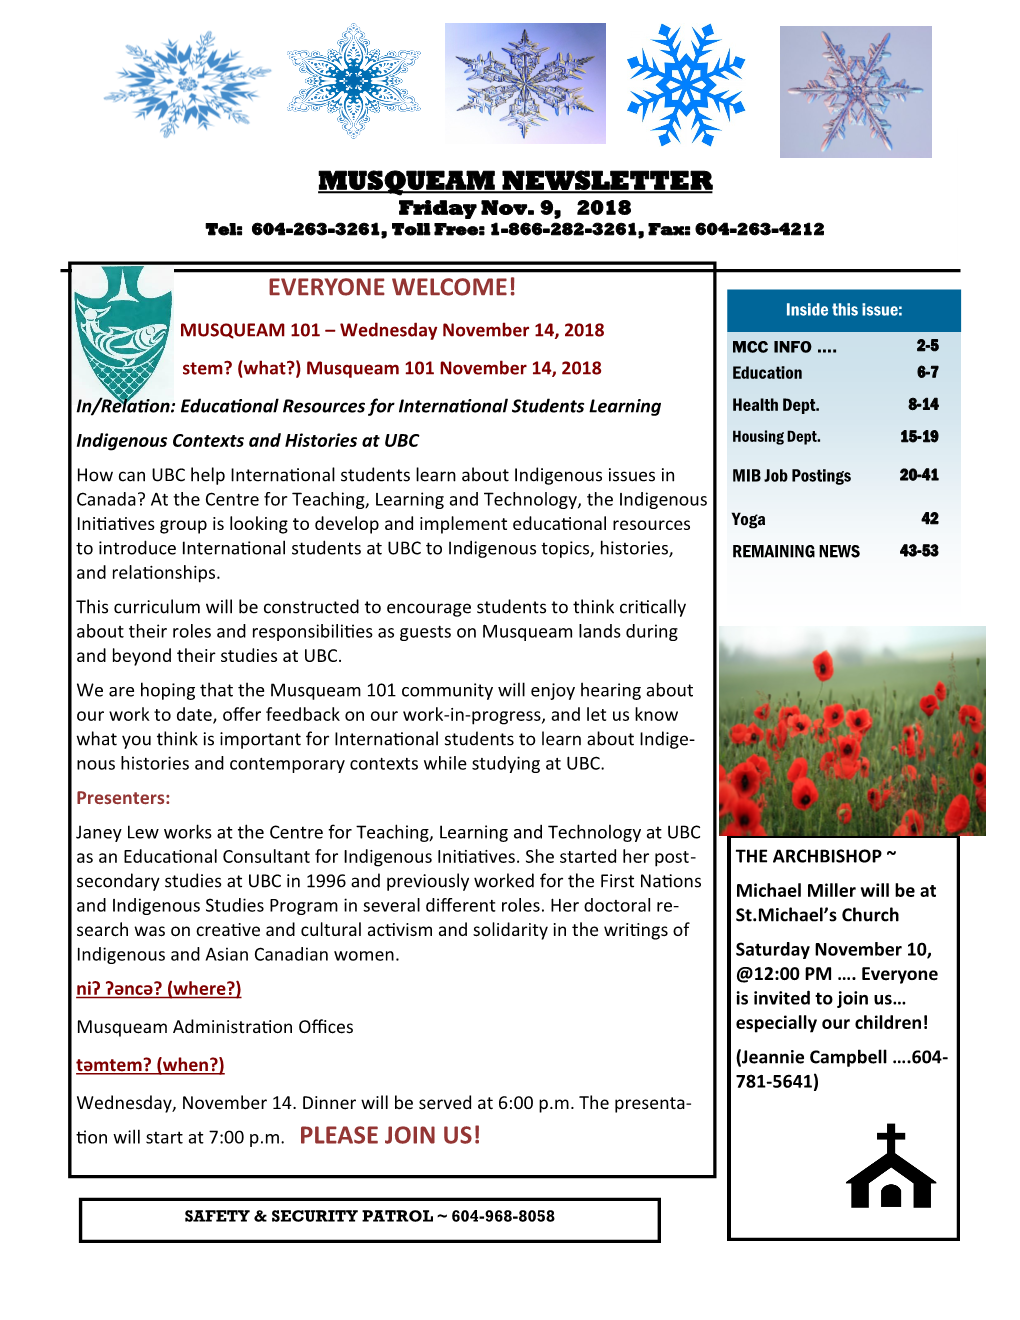 Musqueam Newsletter Everyone Welcome!